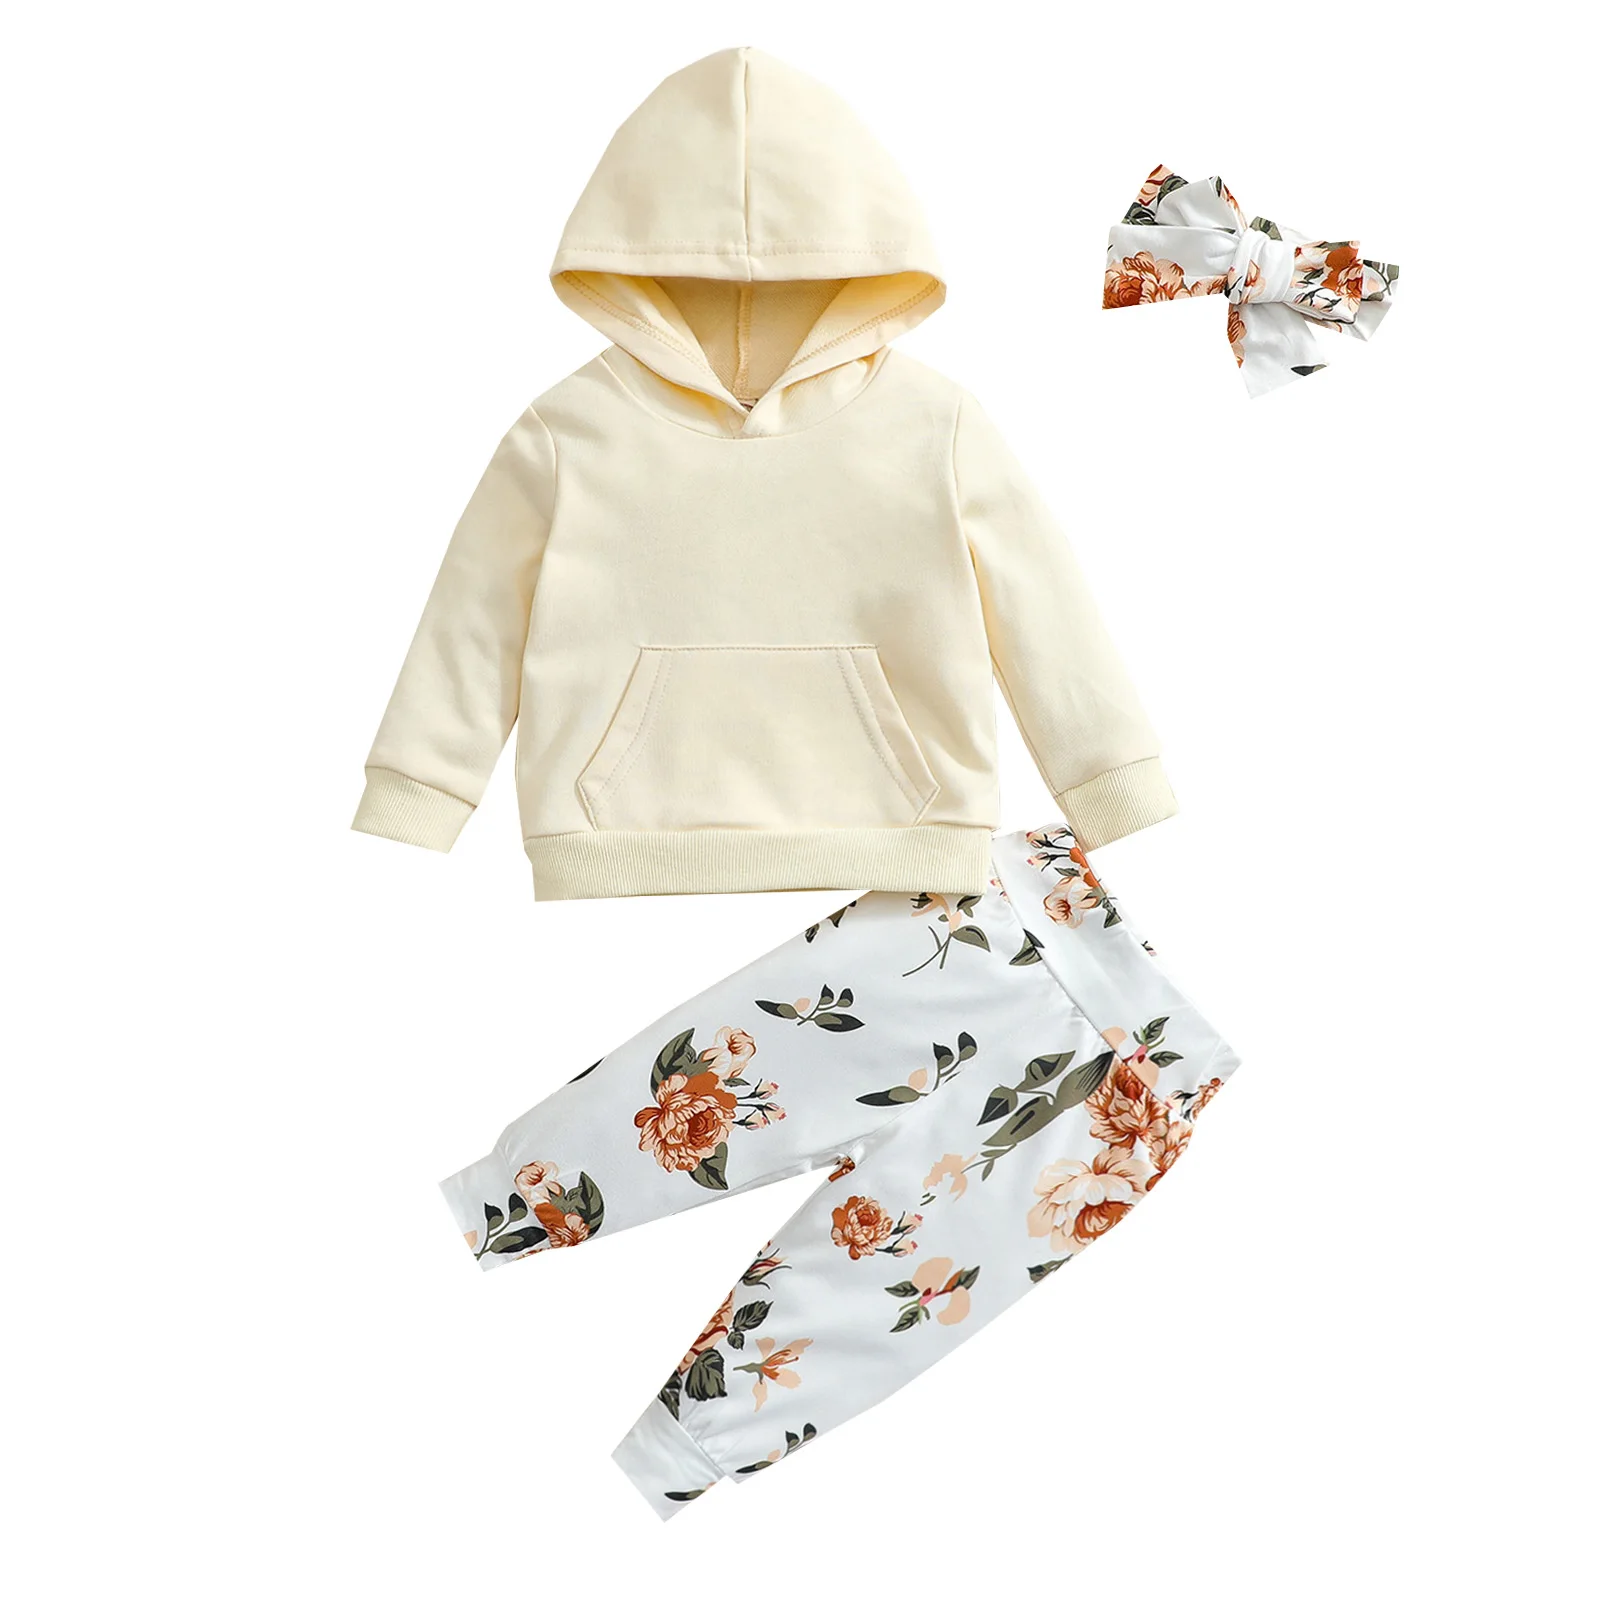 Ma&Baby 0-24M Newborn Toddler Infant Baby Girls Clothes Set Pocket Hooded Sweatshirt Top Rose Floral Pants Outfits DD40 baby dress set for girl